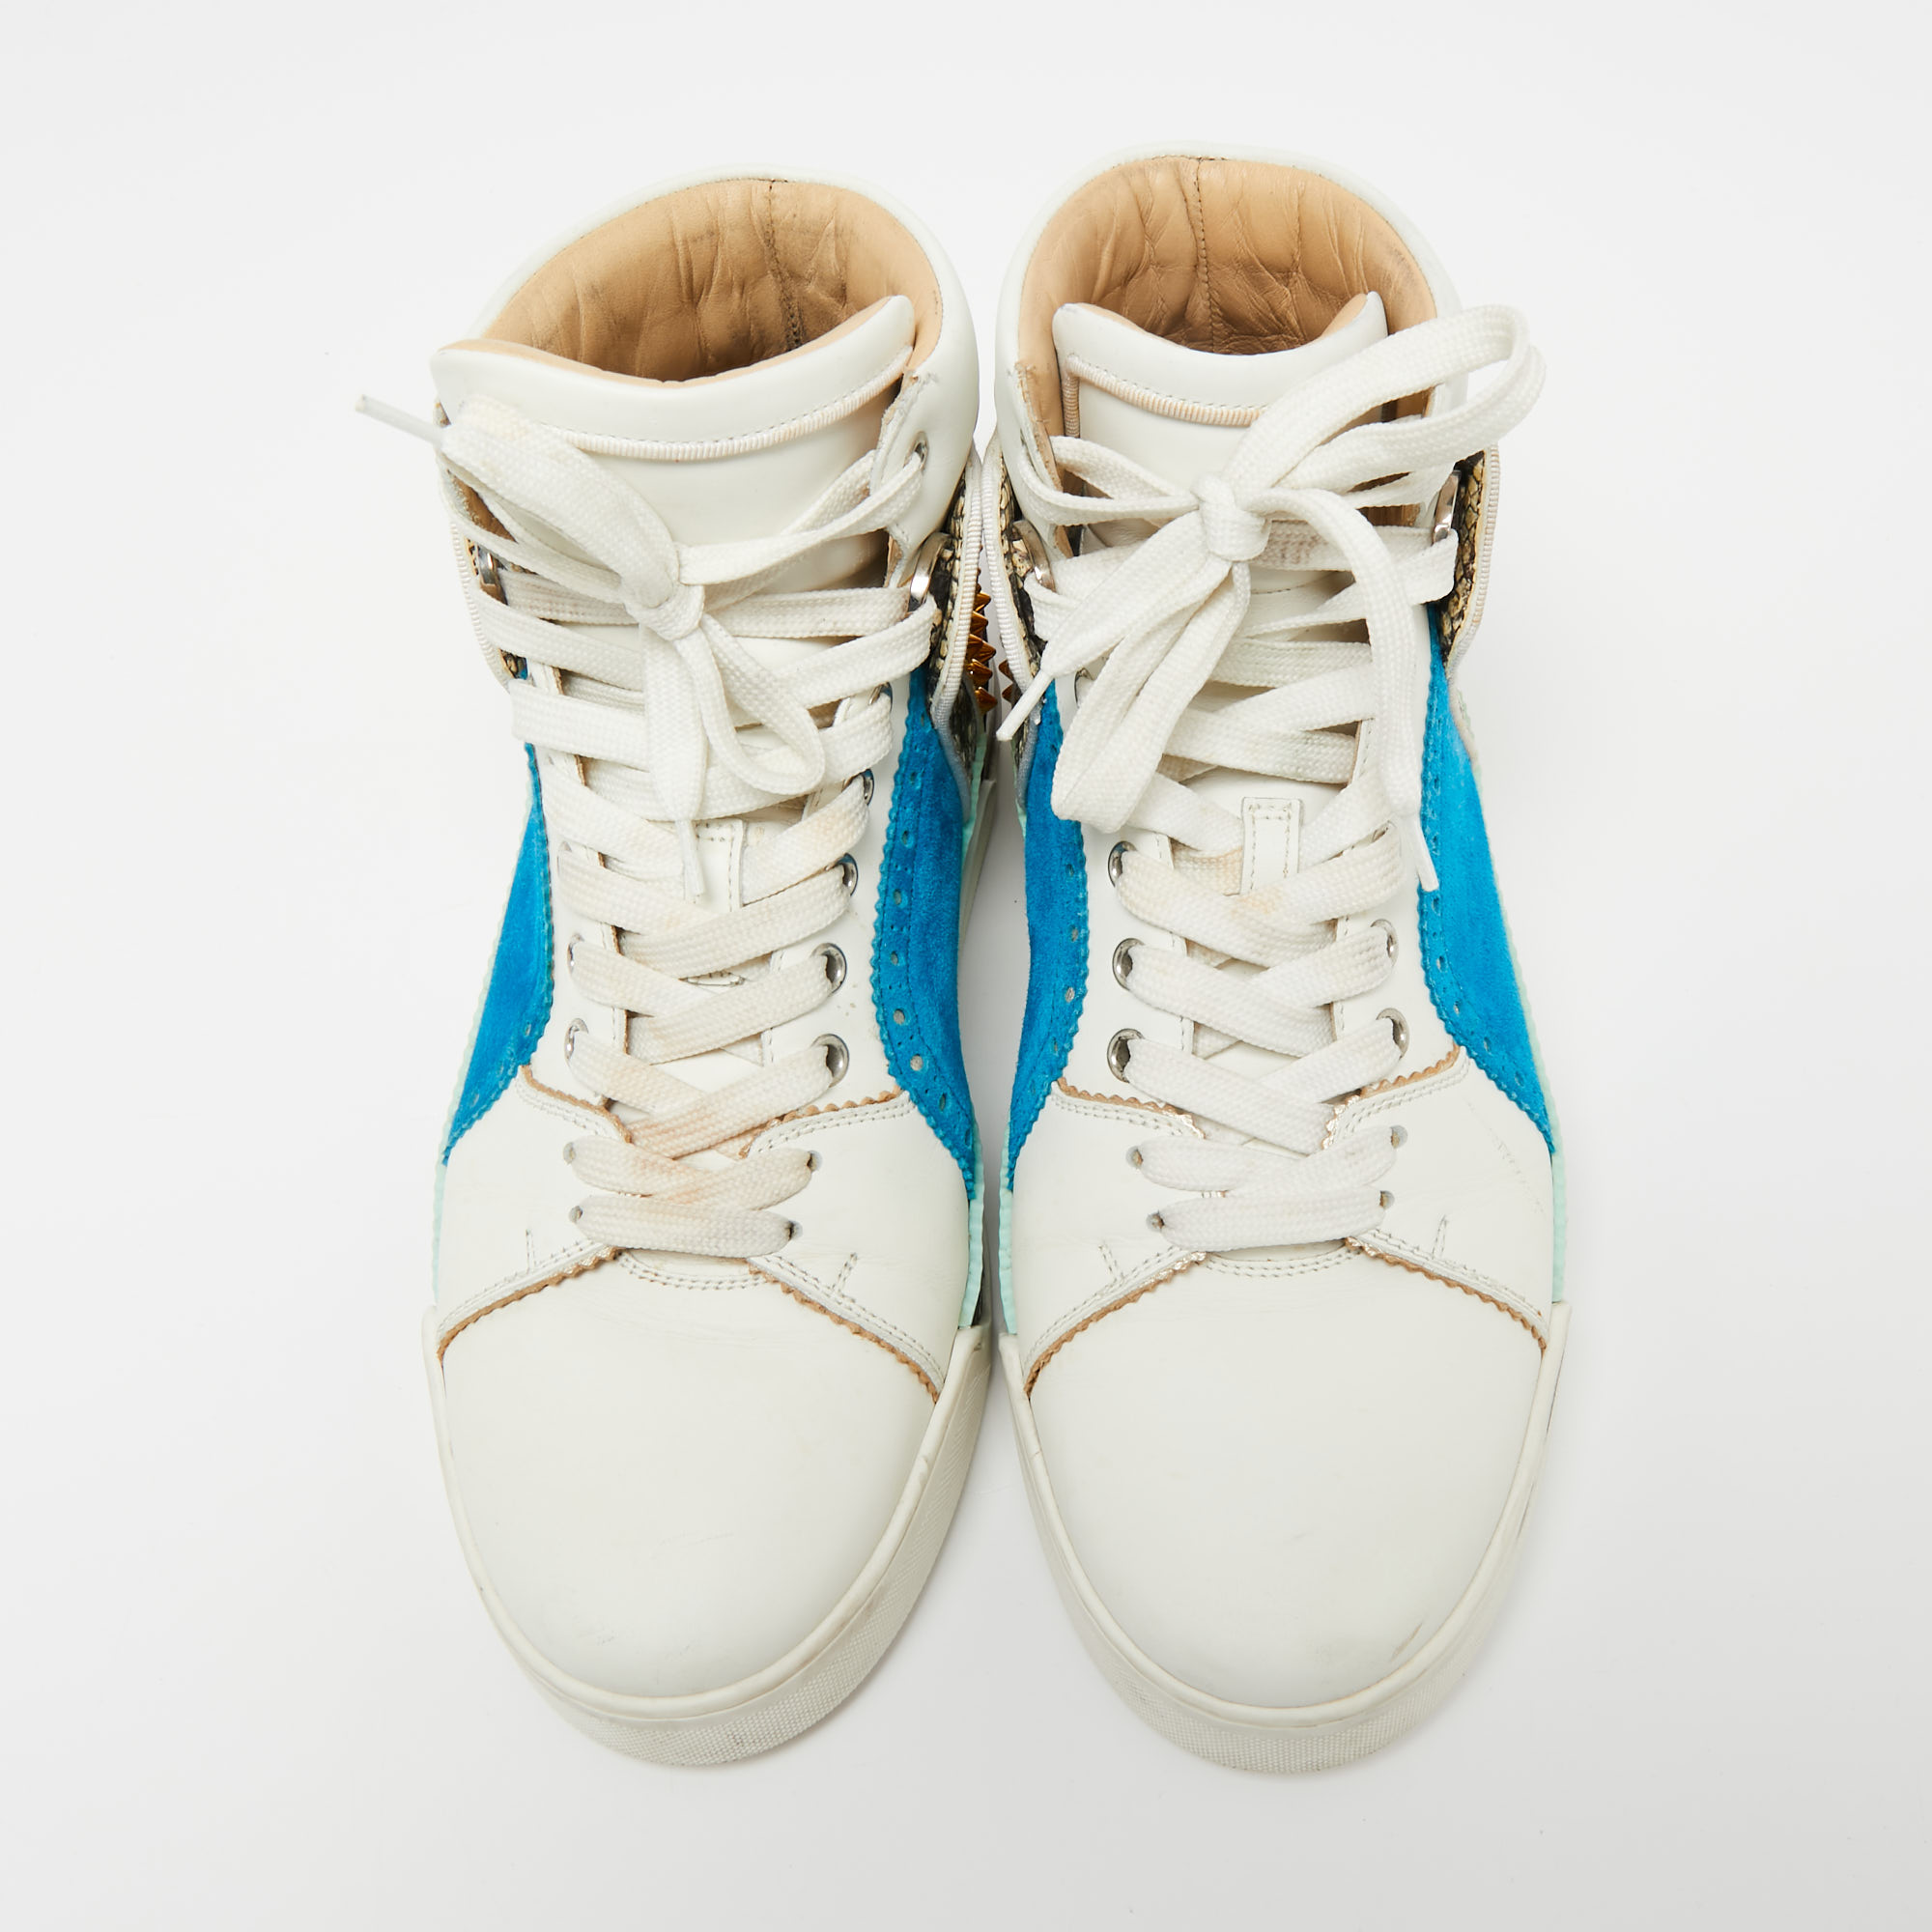 Christian Louboutin Multicolor Leather And Python Embossed Louboukick High Top Sneakers Size 40